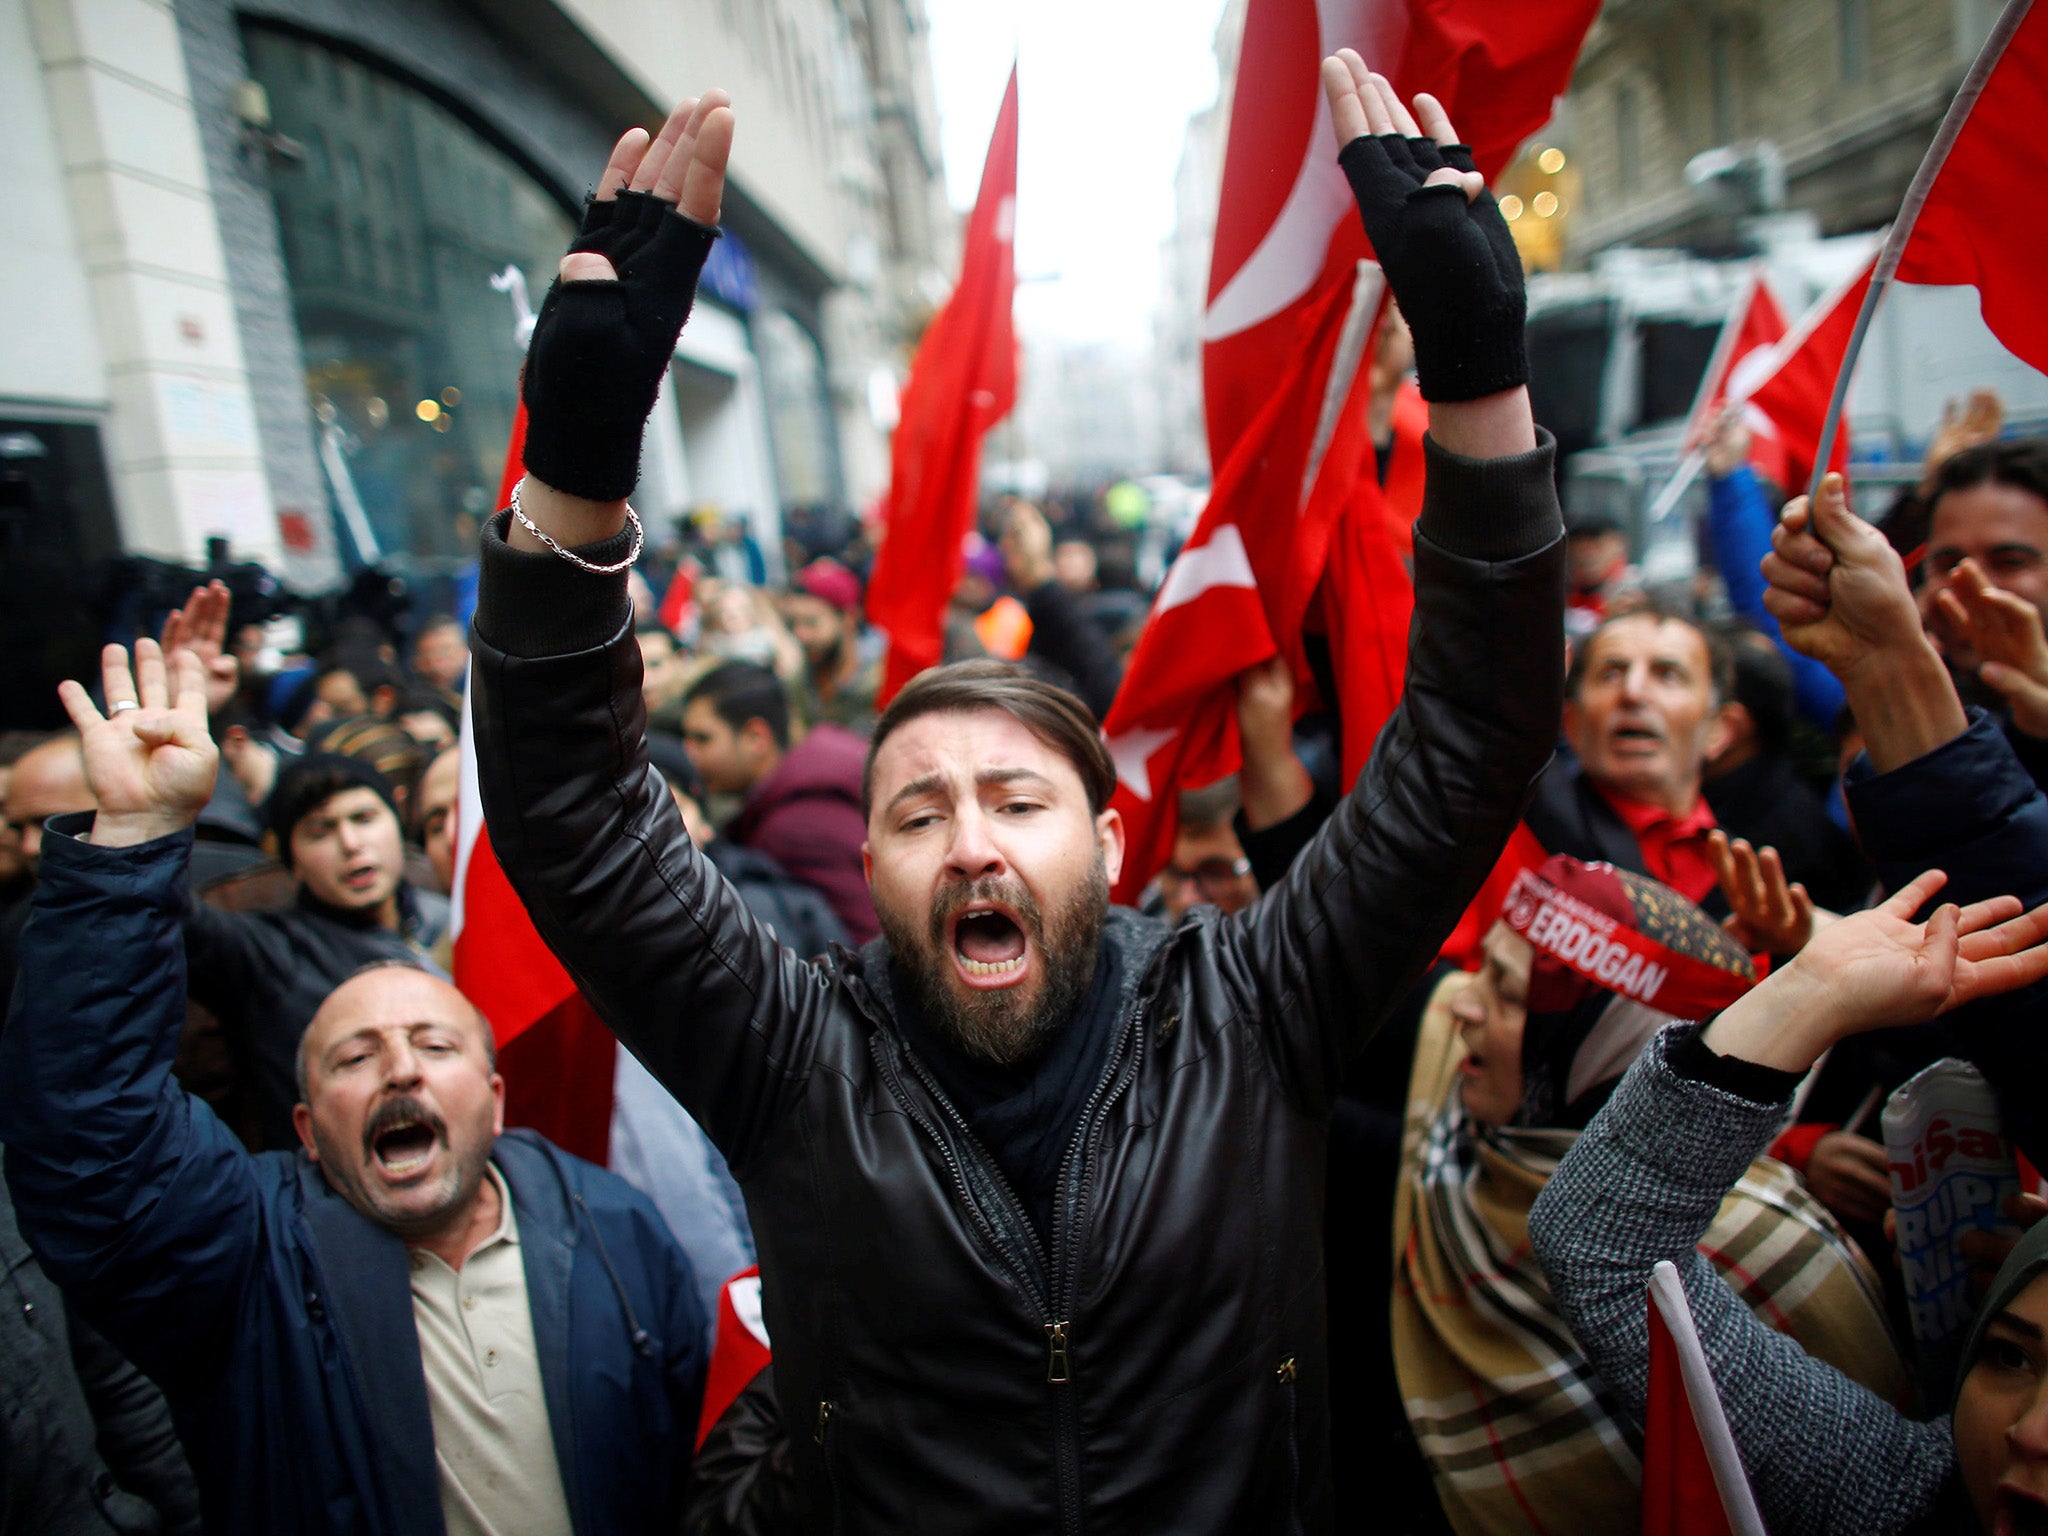 Turkish supporters of President Erdogan protest outside the Dutch Consulate in Istanbul